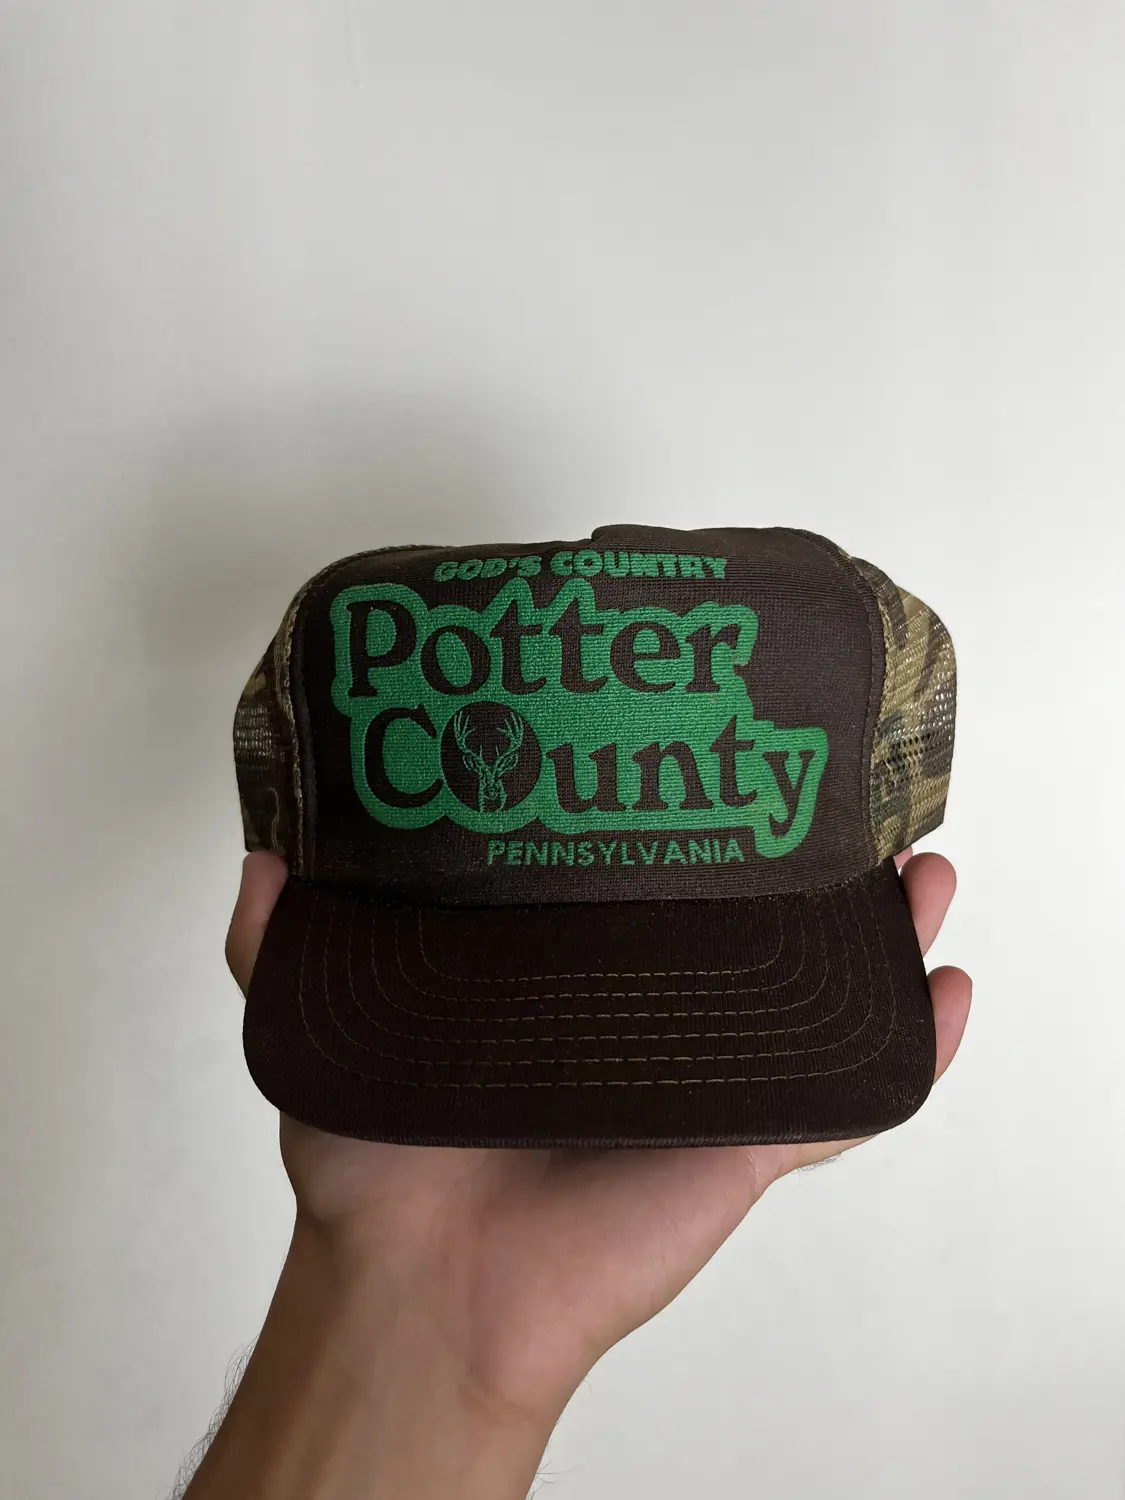 Potter county camo hat